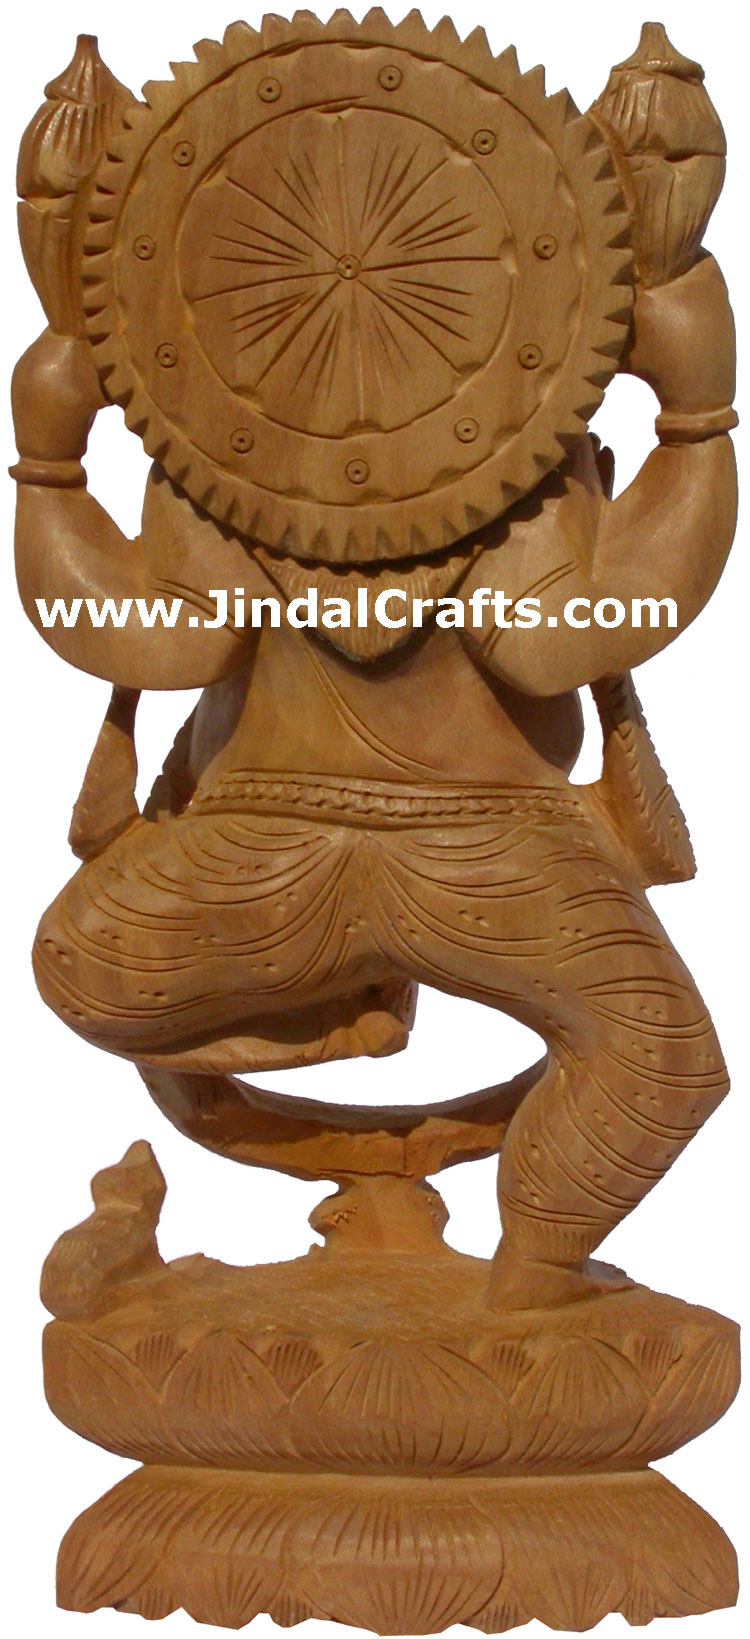 Hand Carved Wooden Ganesha Statuette Hinduism Art India Religious Figure Murti